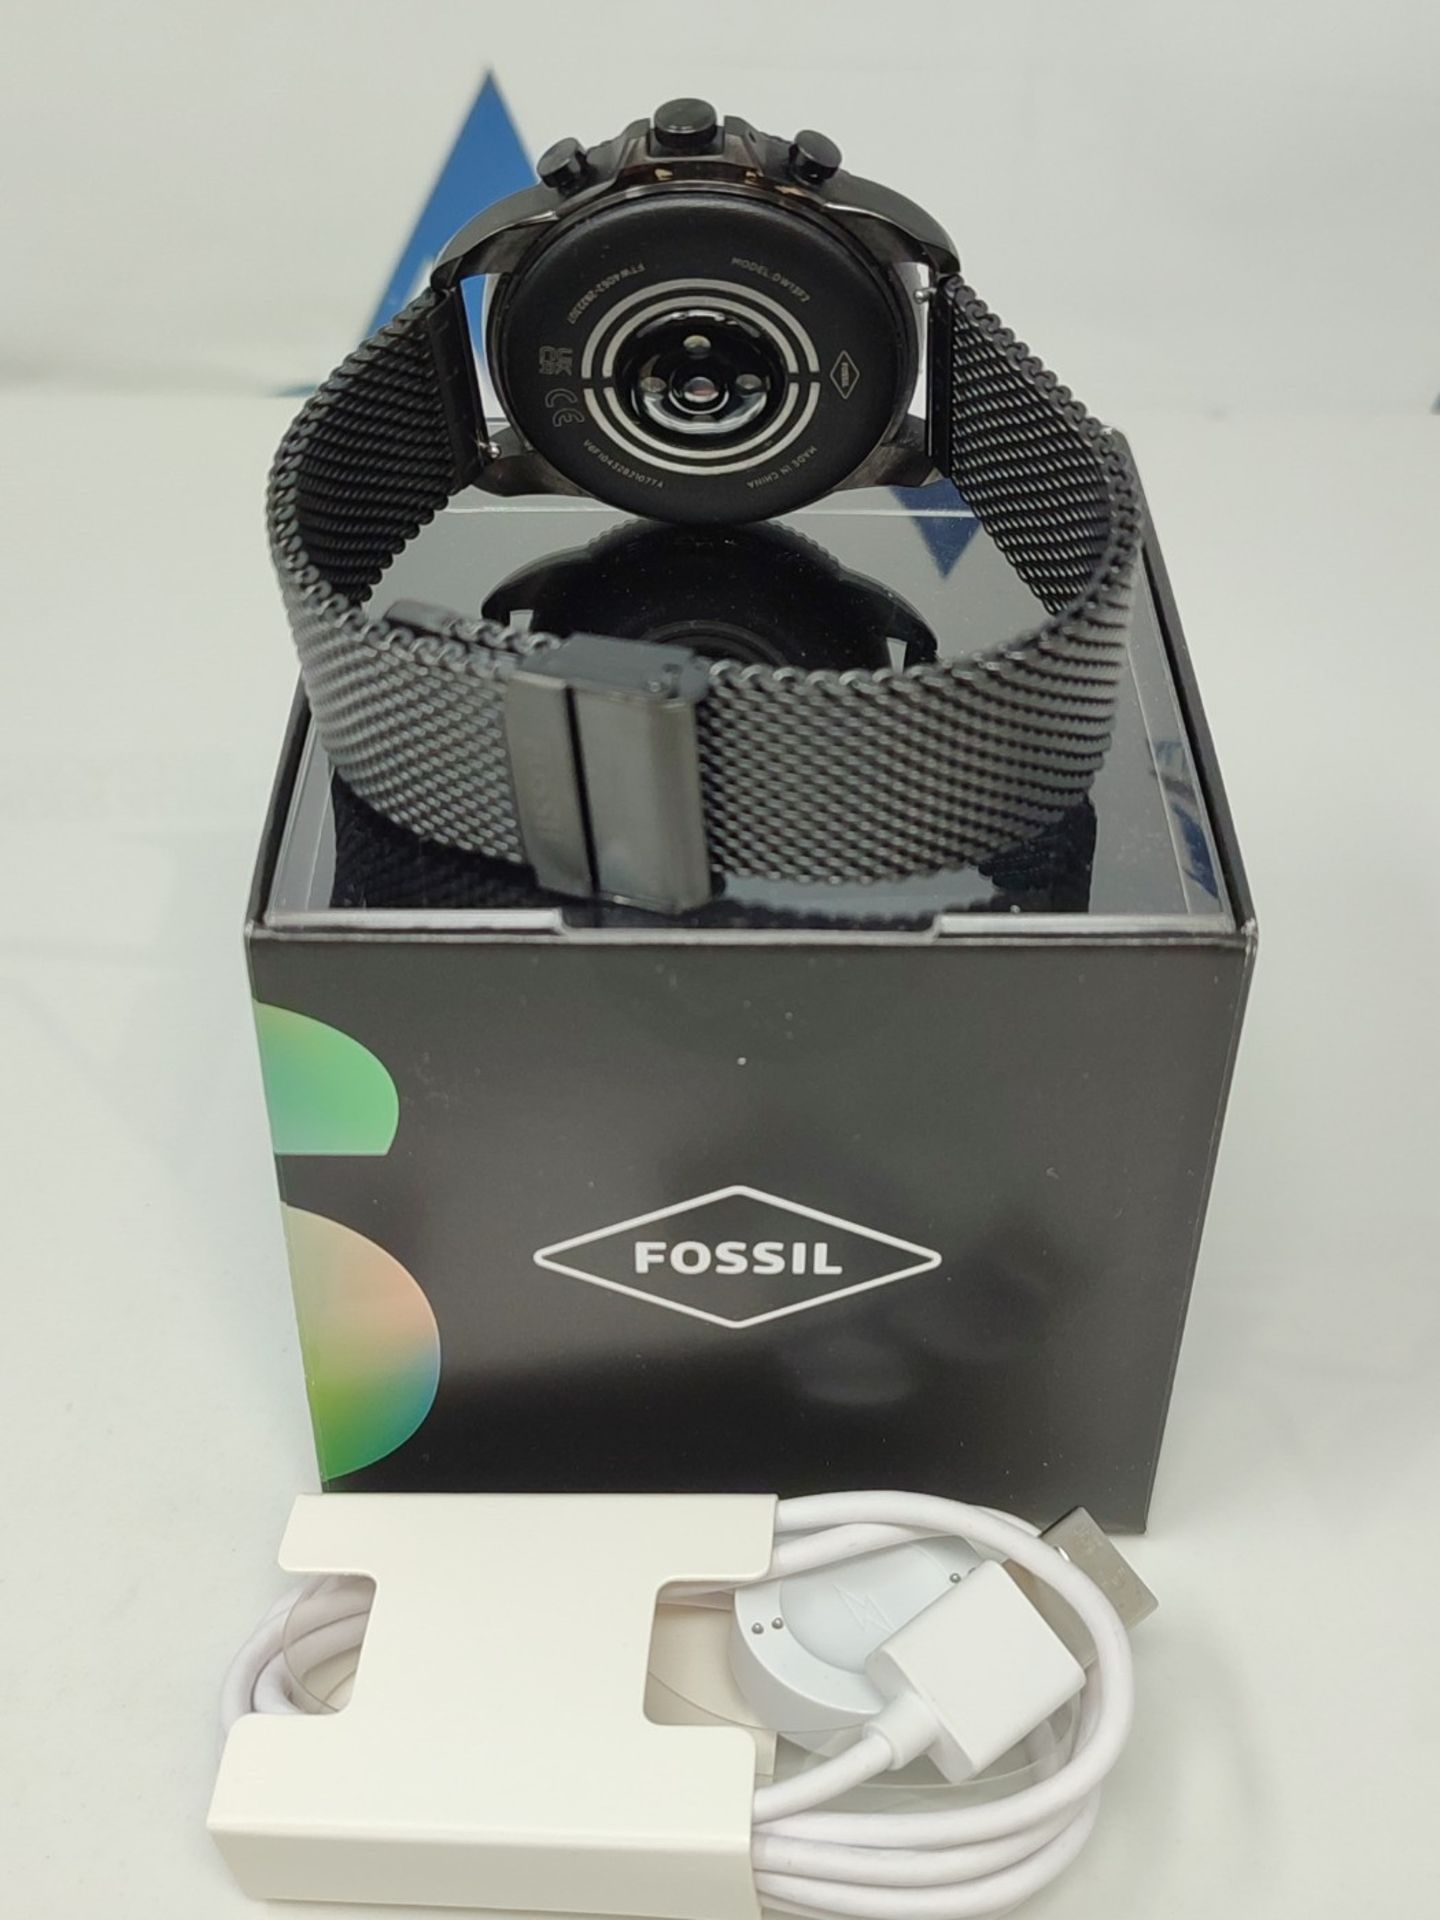 RRP £230.00 Fossil Men's Gen 6 smartwatch with speaker, heart rate, NFC, and smartphone alerts $FT - Image 3 of 3